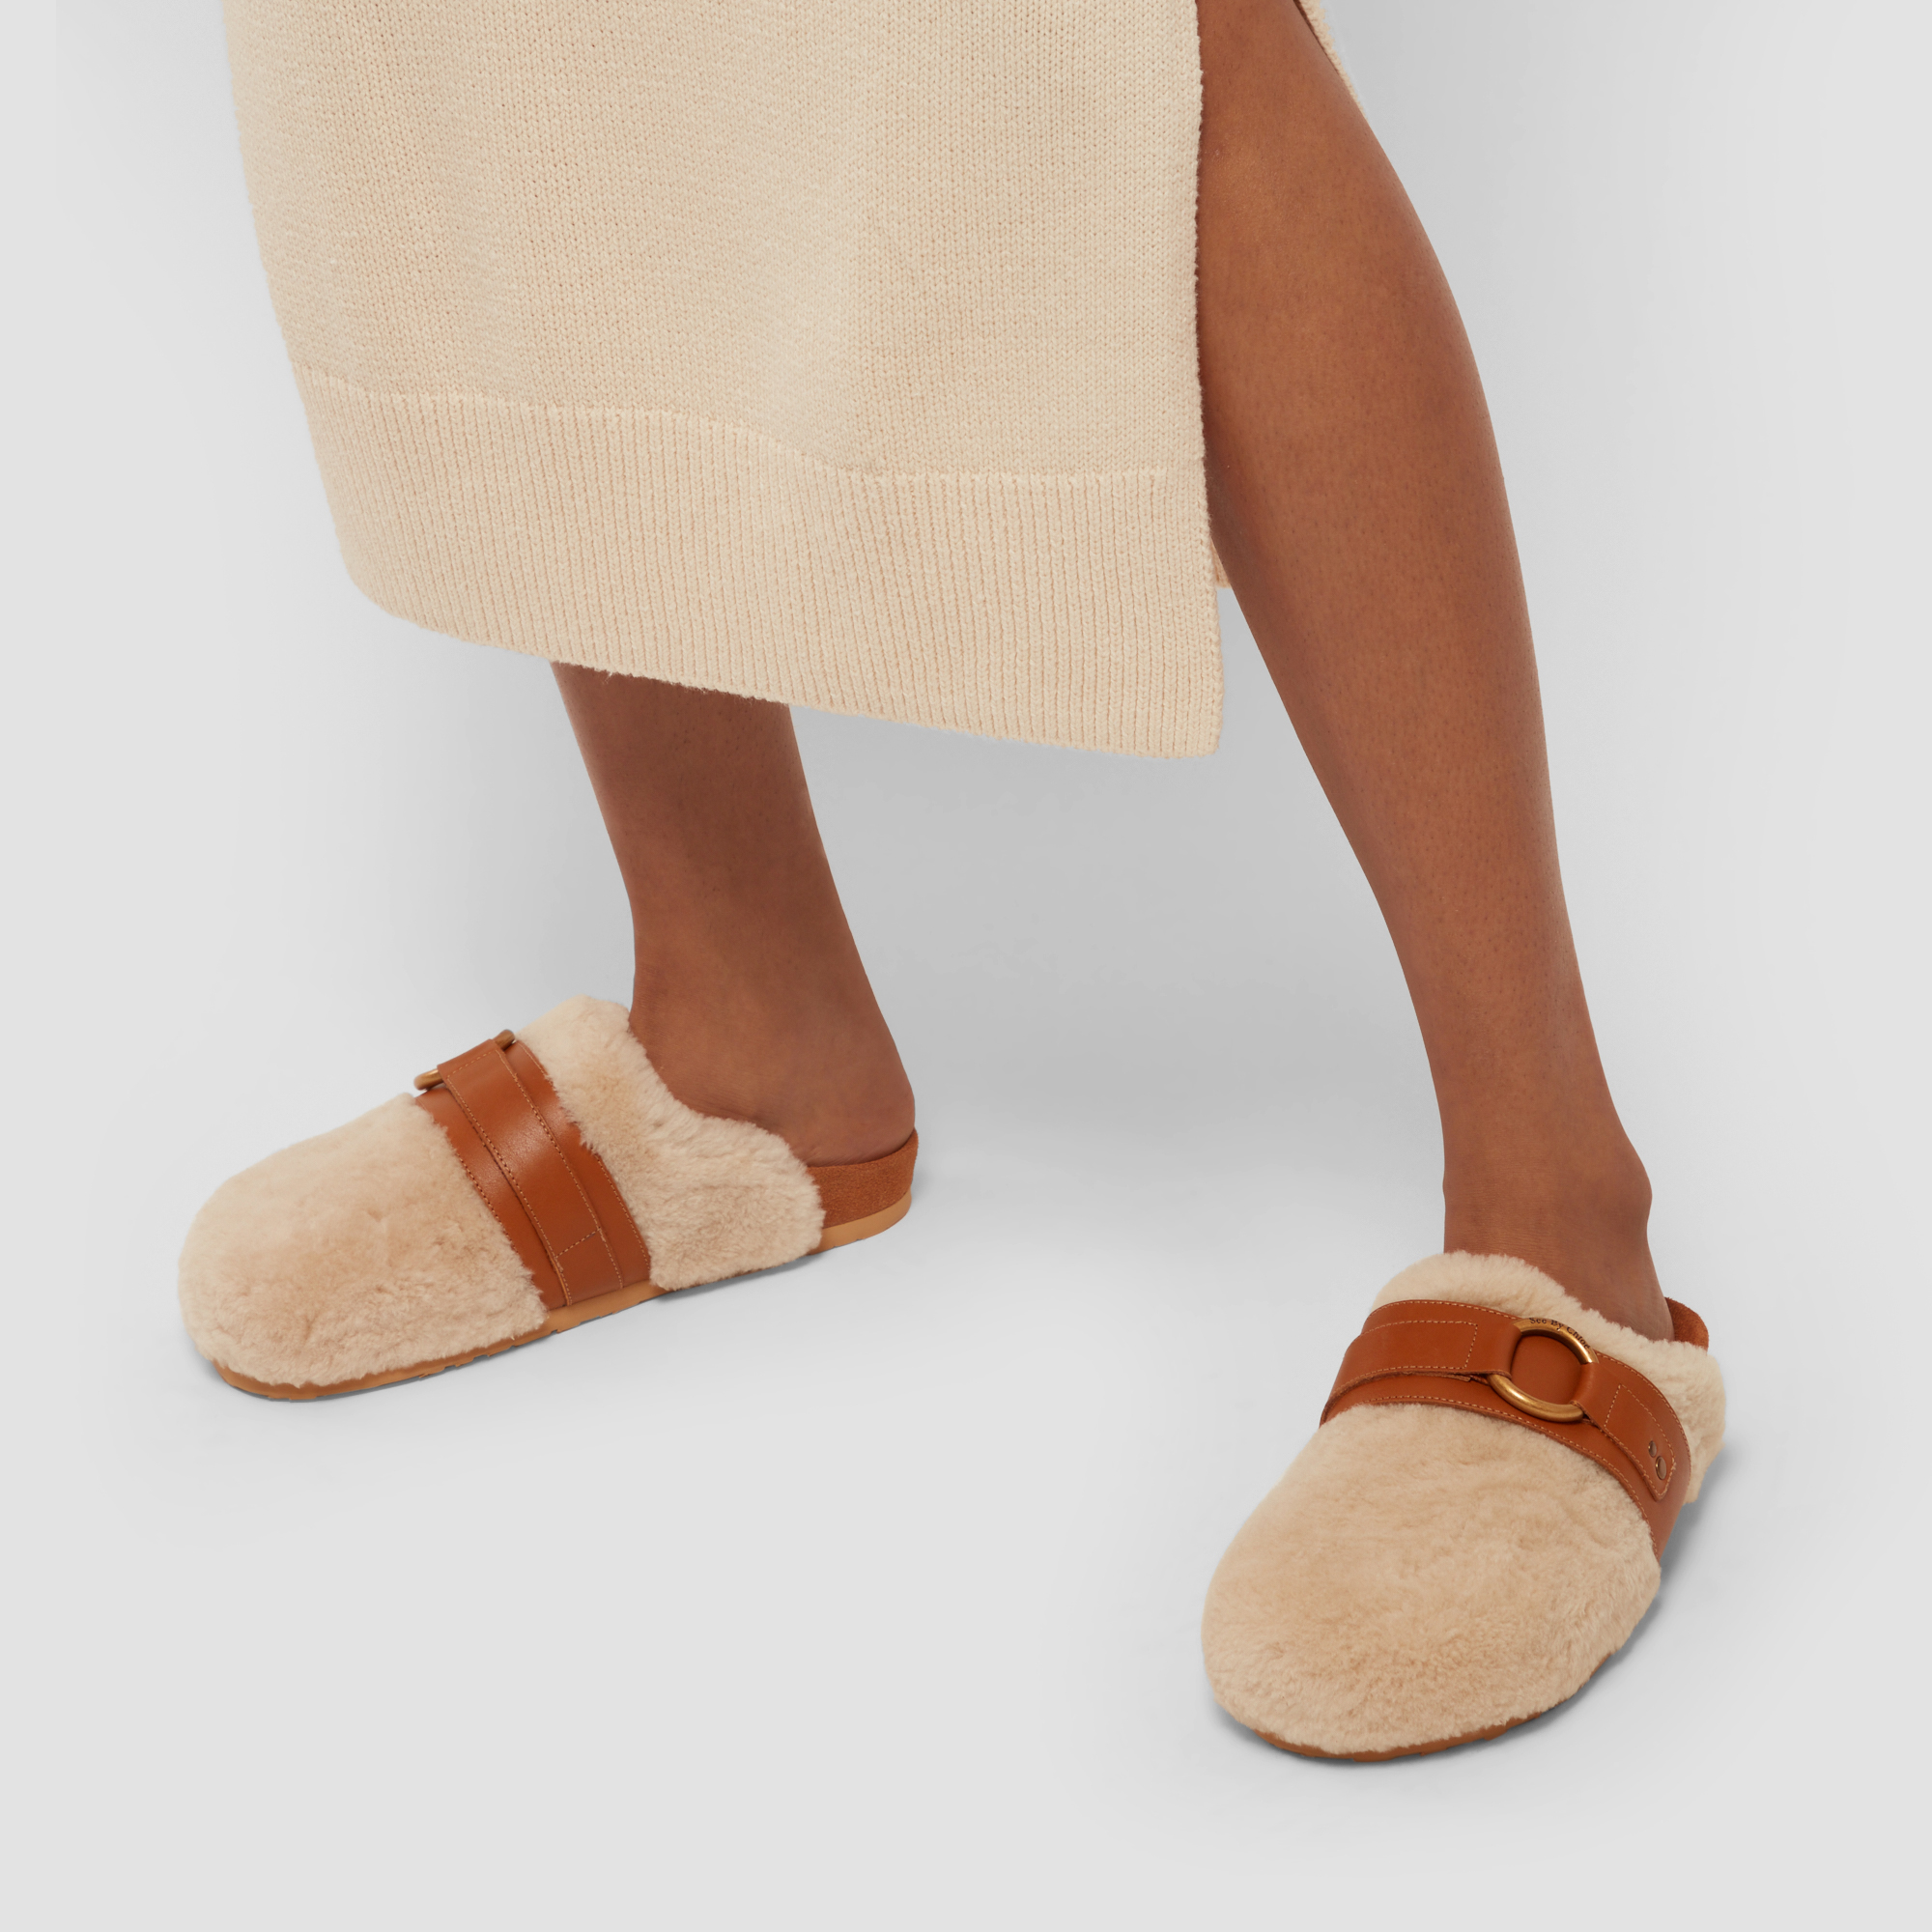 See By Chloé Gema mules for Women - Beige in KSA | Level Shoes